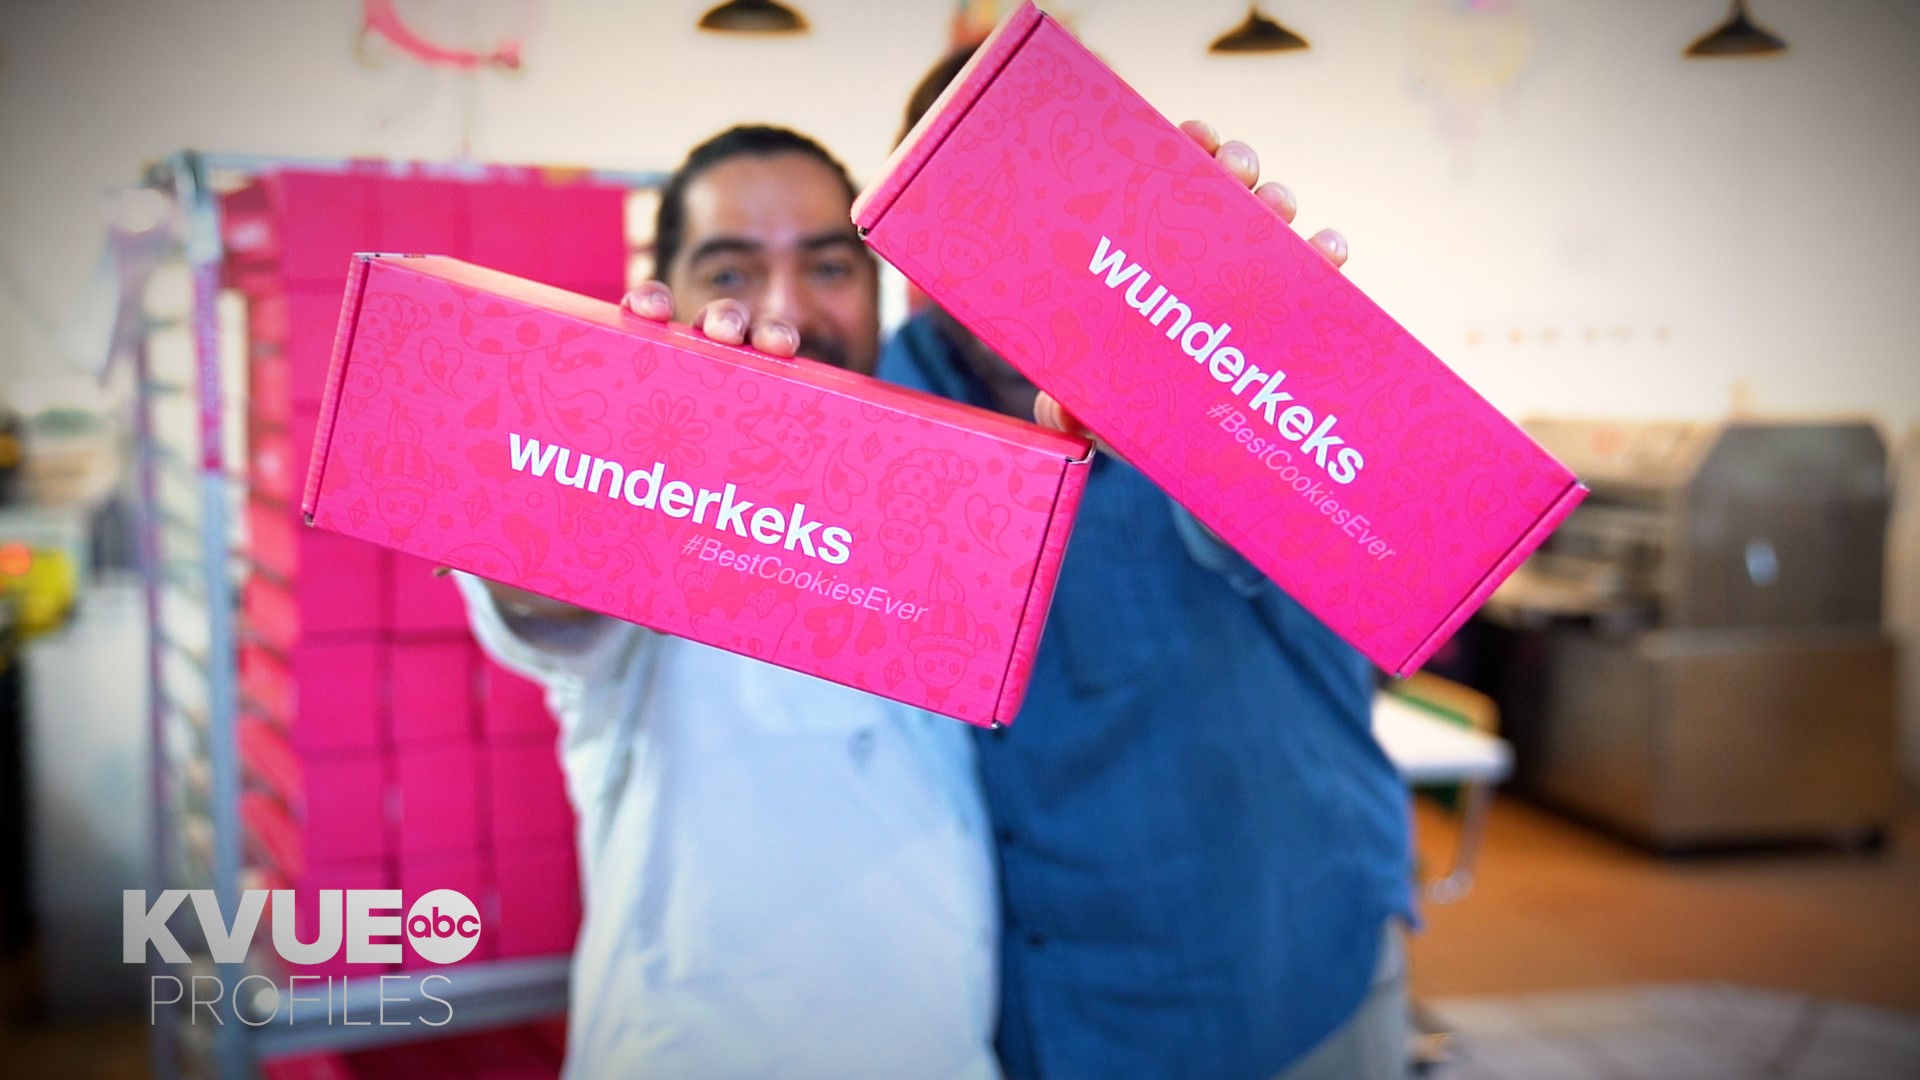 Wunderkeks is so much more than just a cookie business. It’s now a multi-million dollar dessert empire building a safe space, one bite at a time.